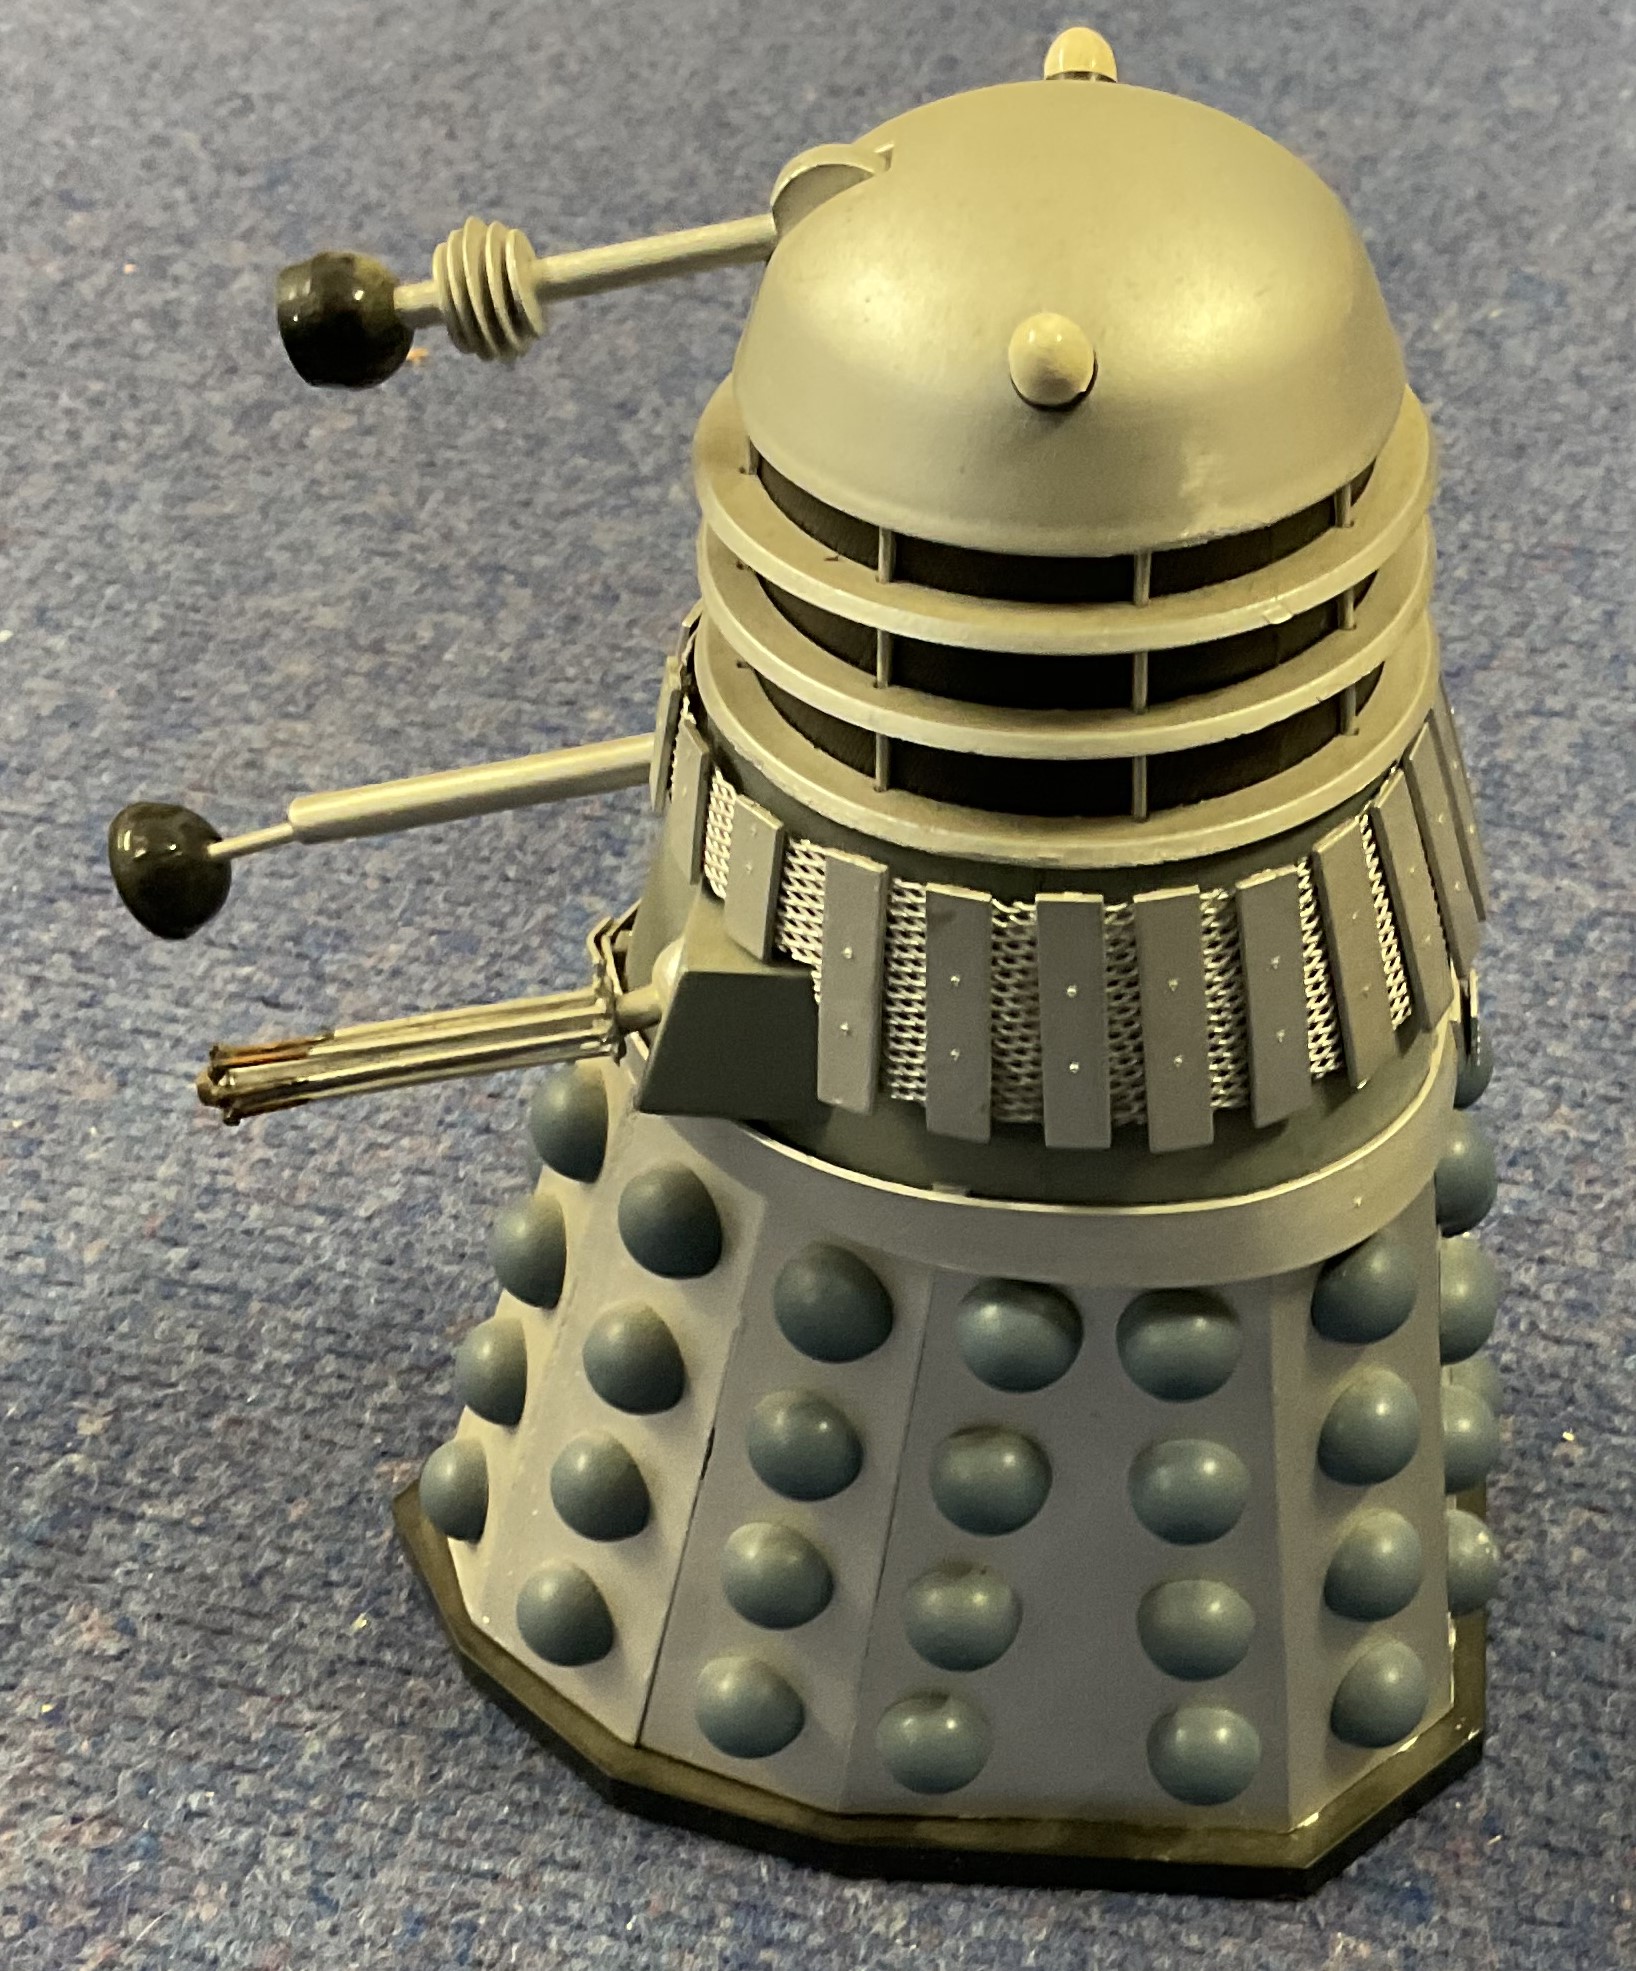 Dalek Model by Amerang approx 8 inches tall Silver in colour and made of Plastic good conditionWe - Image 2 of 2